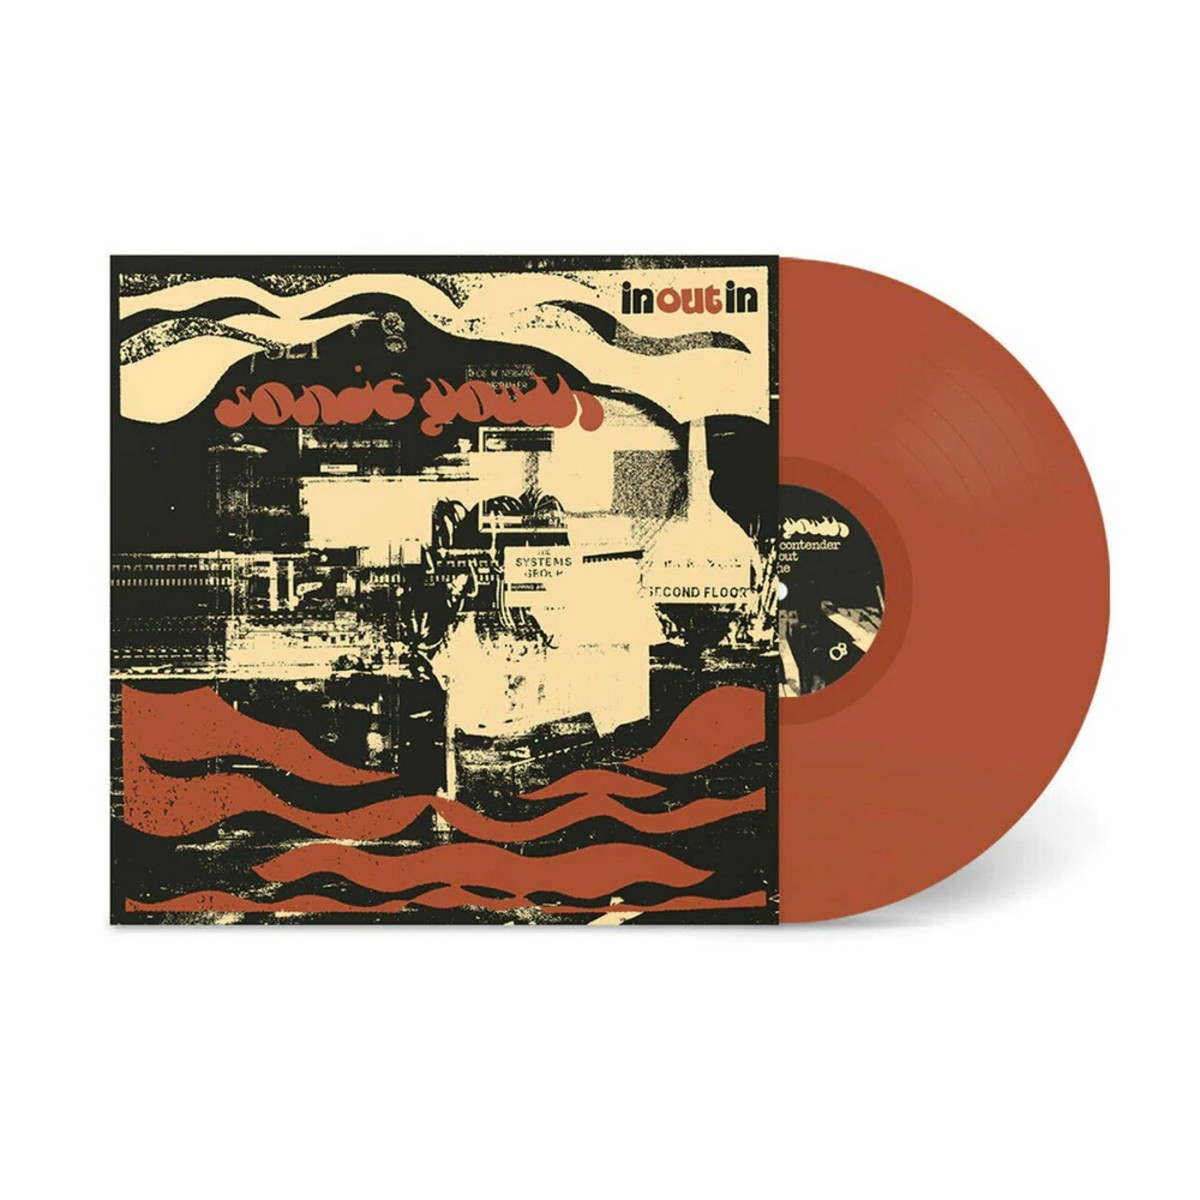 You can order Sonic Youth's "In/Out/In" on maroon vinyl as well.